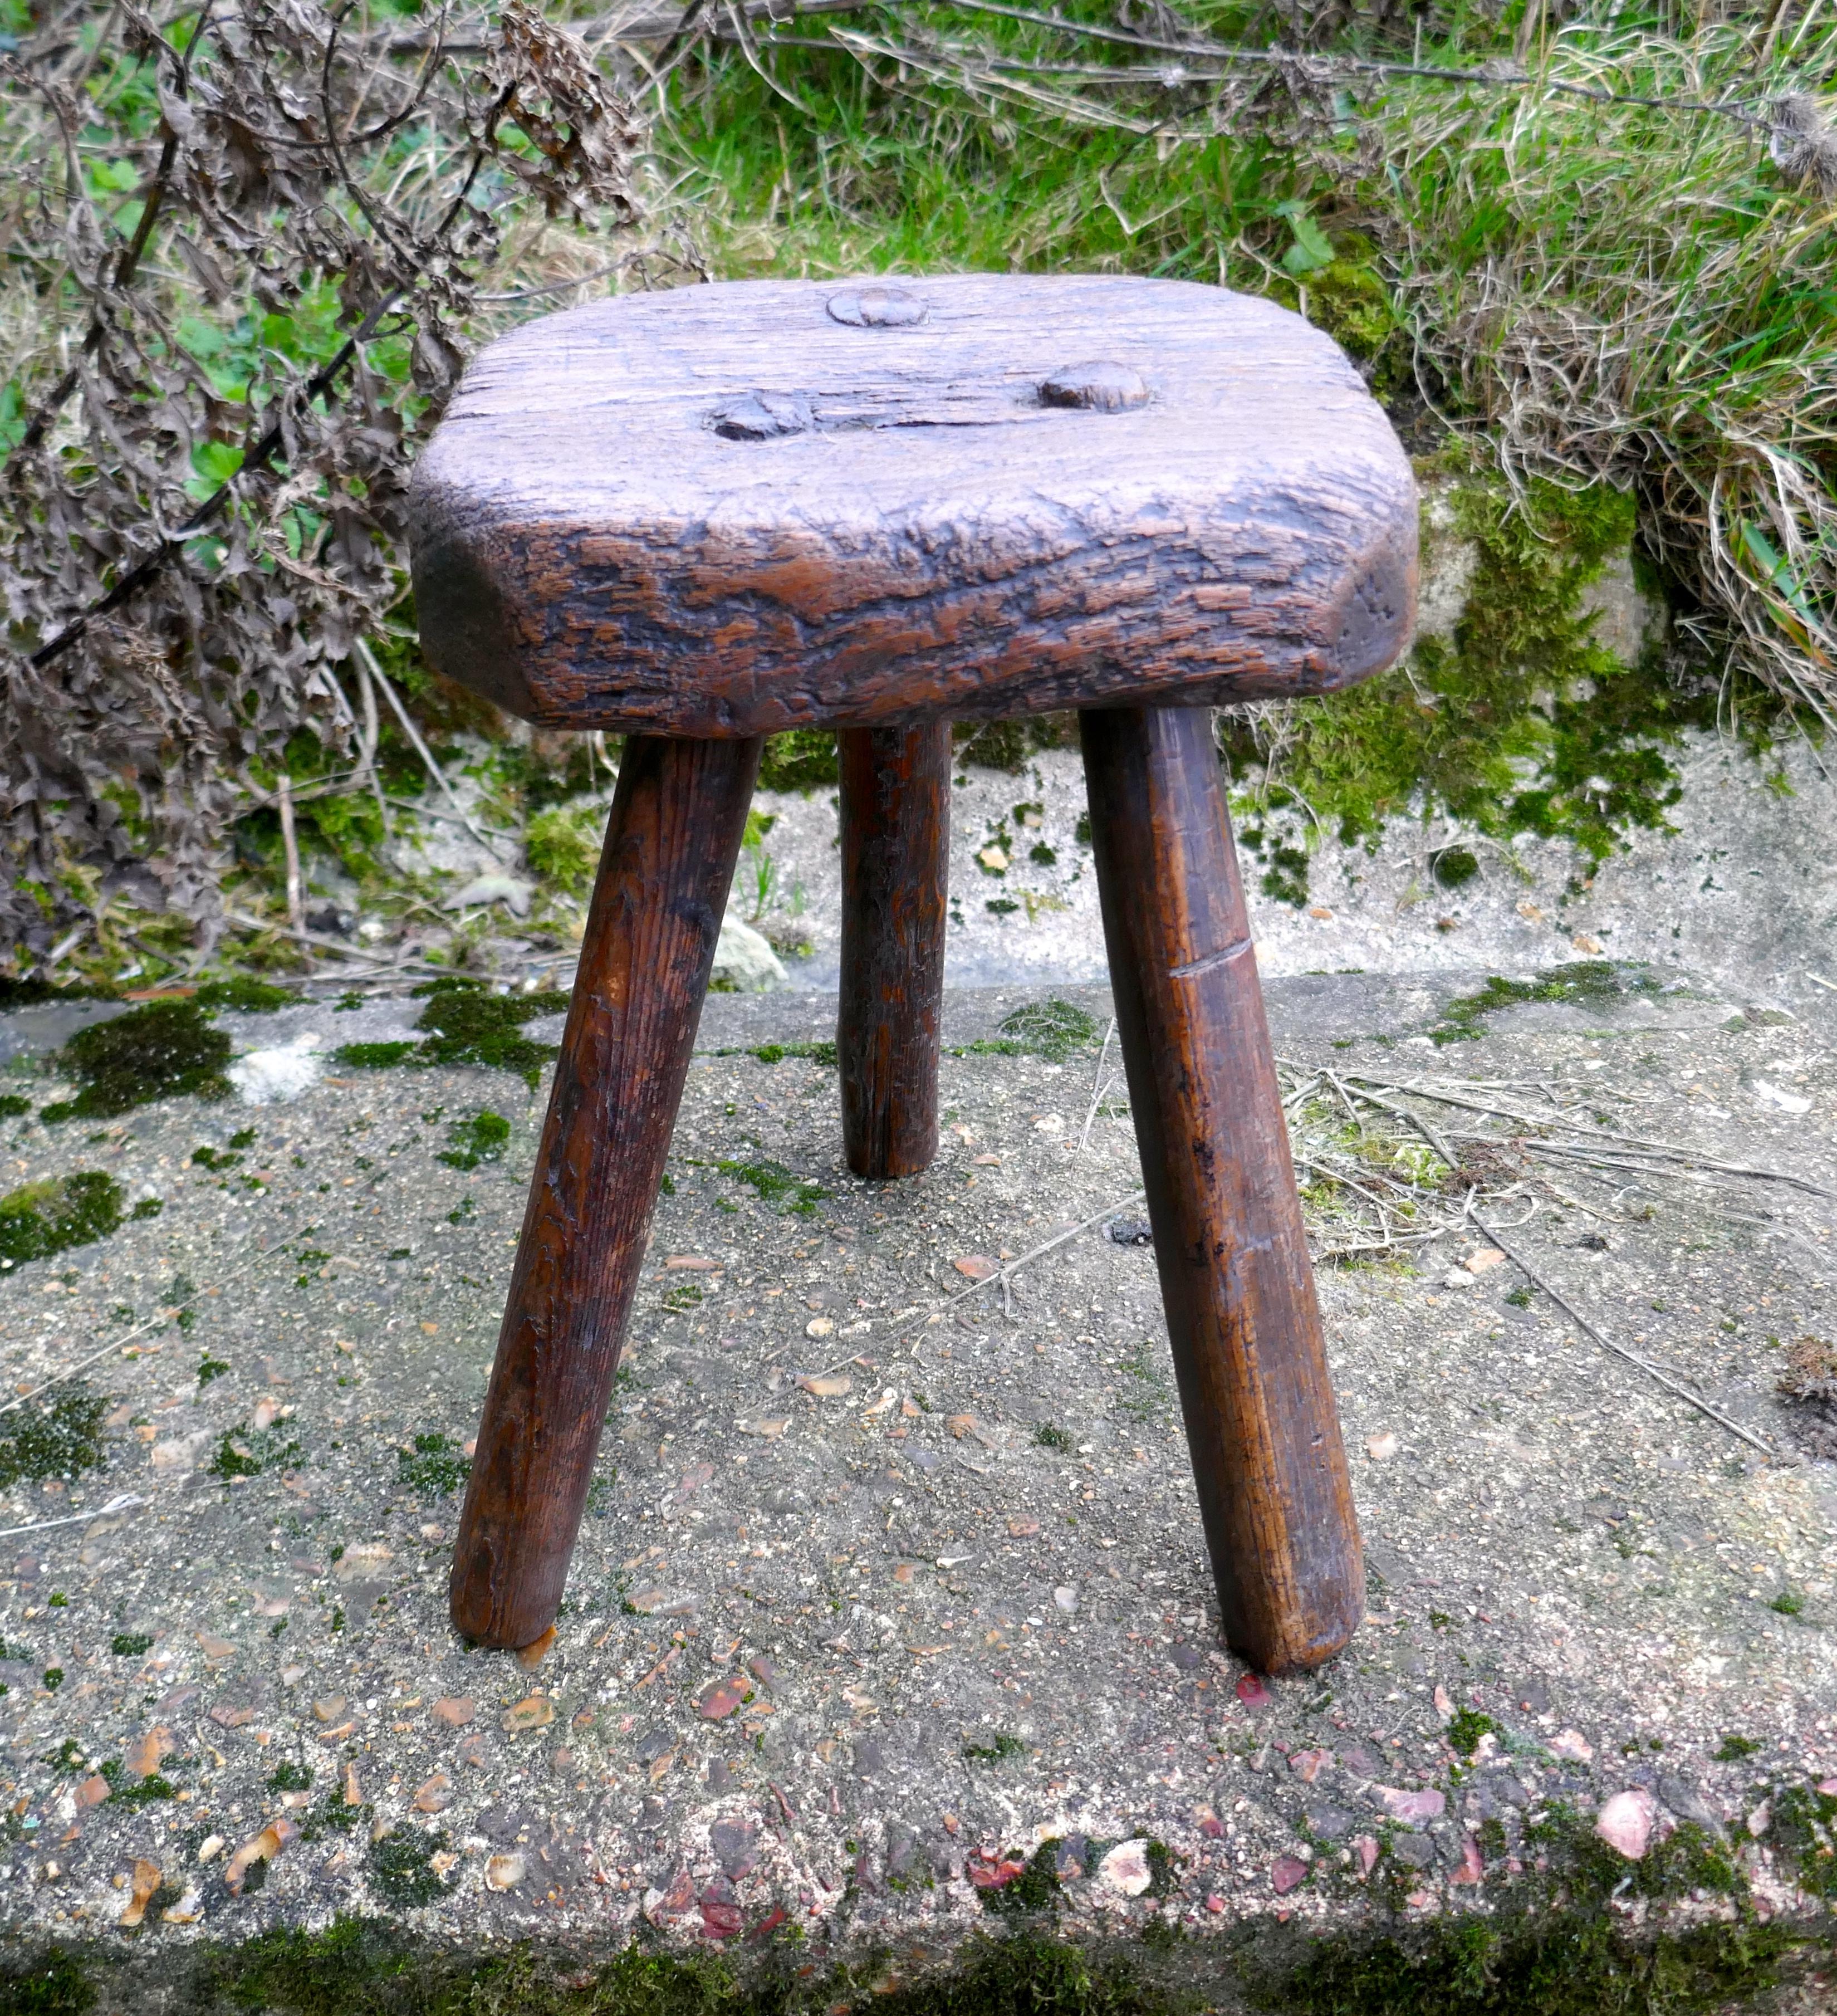 Very Rustic 18th Century Elm Dairy Stool or Milk Maid’s Stool

This is a very small piece, the stool is made in elm, the seat is made from one solid piece with the legs set into the slab, an easy piece for the Milk Made to carry 
The Stool is a